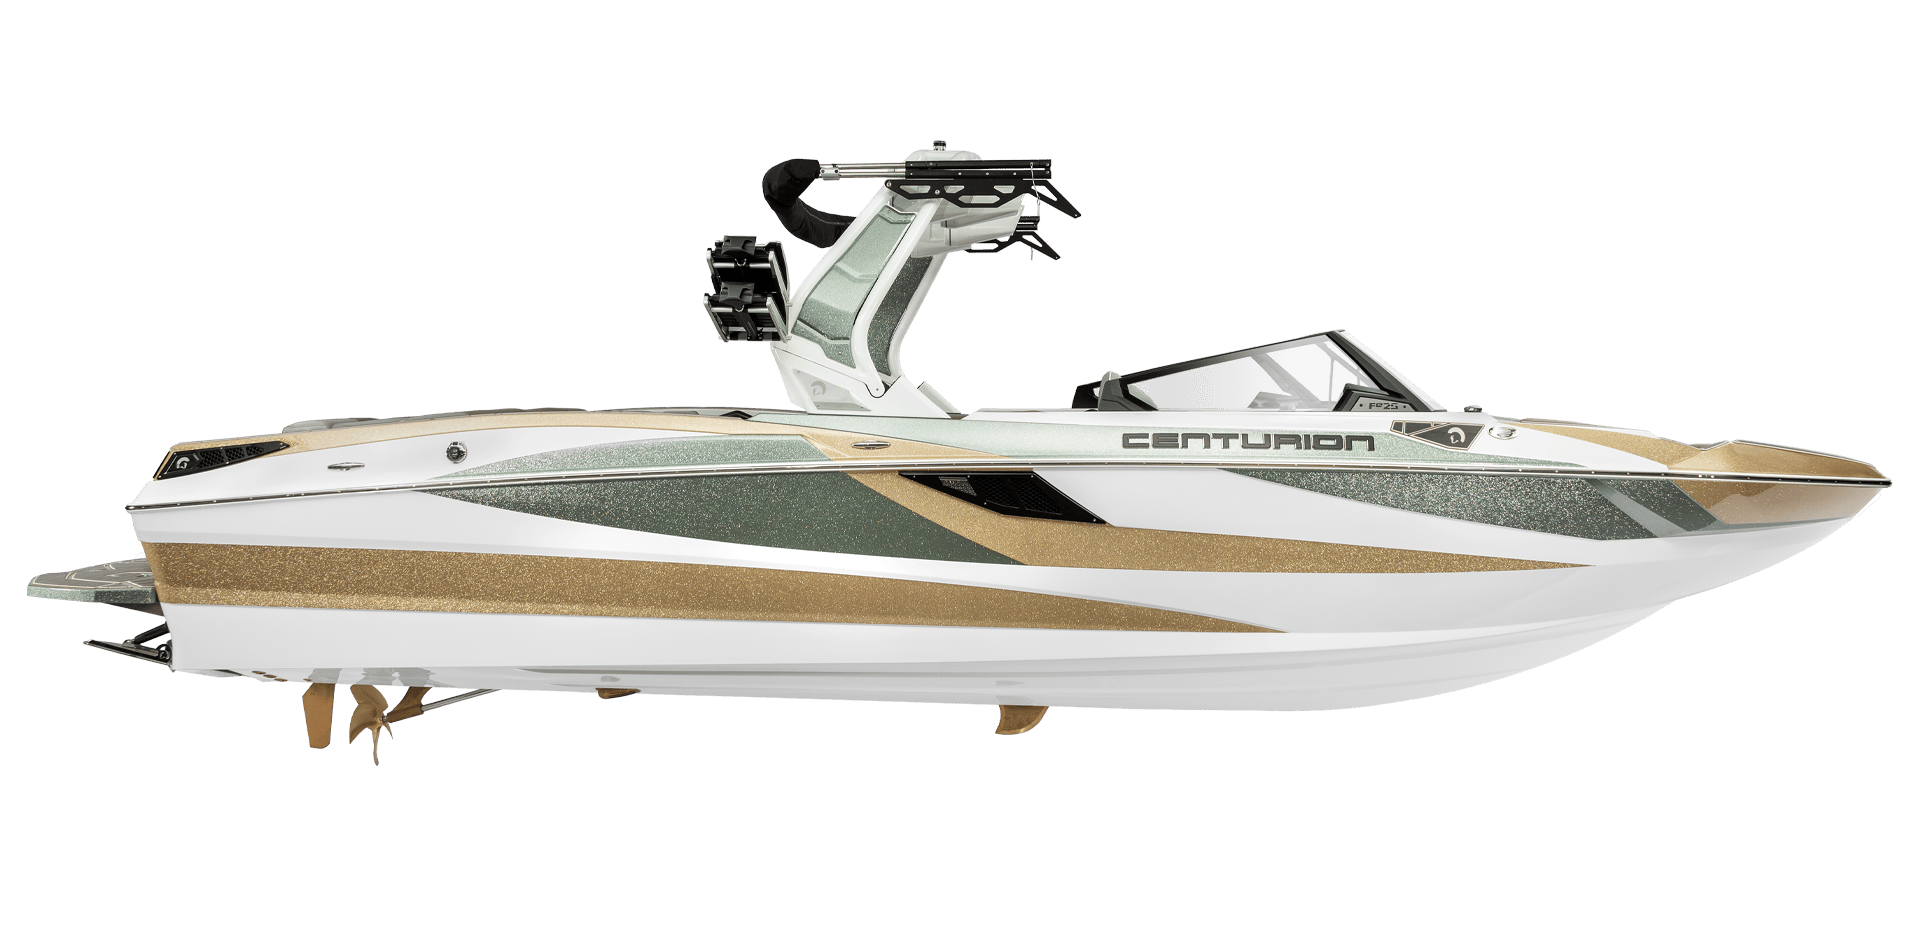 A sleek, modern motorboat with a white, gold, and green color scheme. It features a Centurion logo on the side and a wakeboard tower mounted at the back.